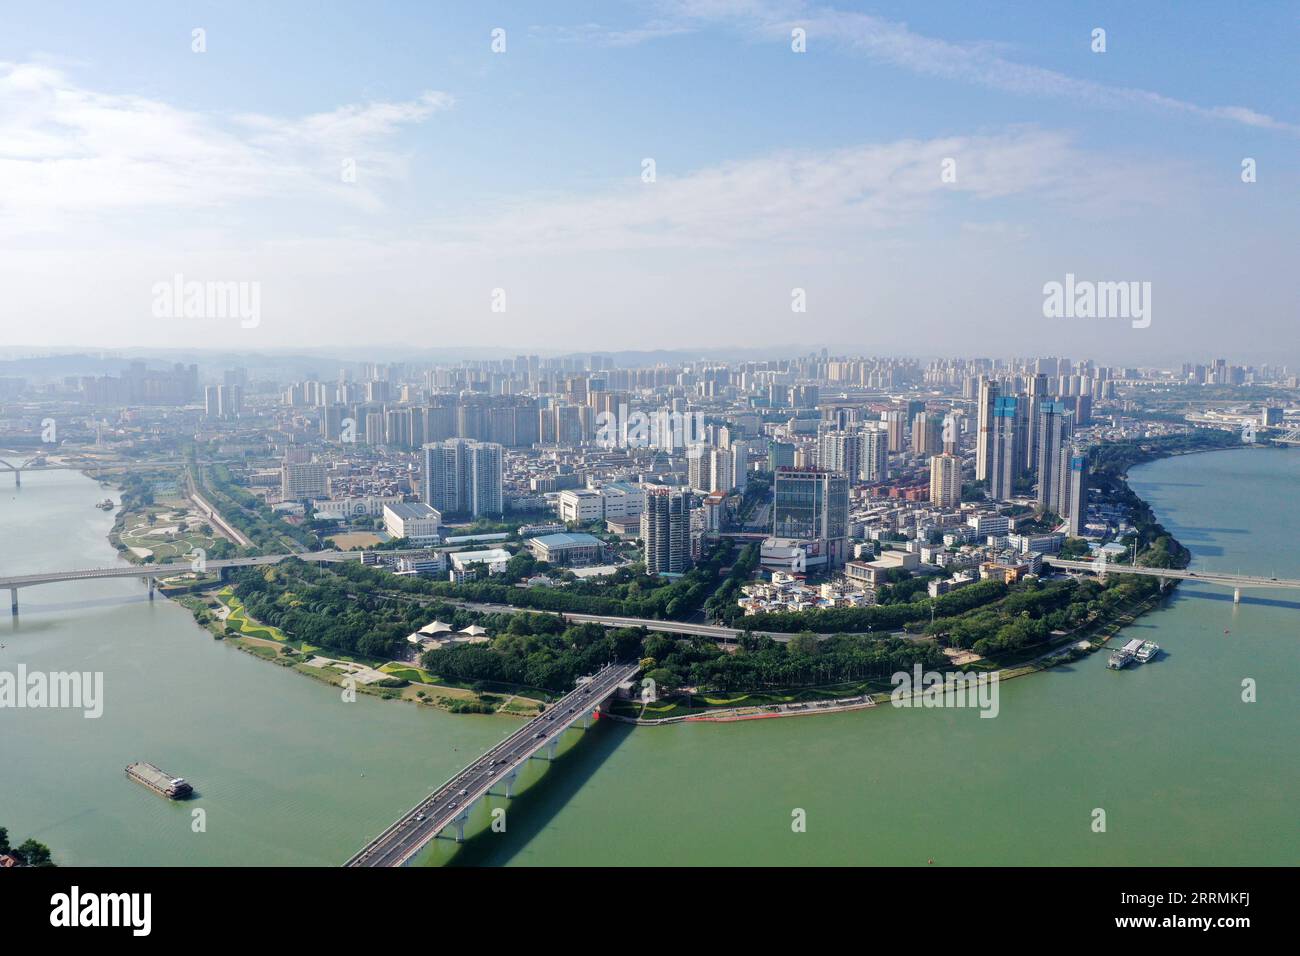 221104 -- NANNING, Nov. 4, 2022 -- This aerial photo taken on Nov. 4, 2022 shows a cityscape on the banks of the Yongjiang River in Nanning, south China s Guangxi Zhuang Autonomous Region.  CHINA-GUANGXI-NANNING-CITYSCAPE-RIVER CN LuxBoan PUBLICATIONxNOTxINxCHN Stock Photo